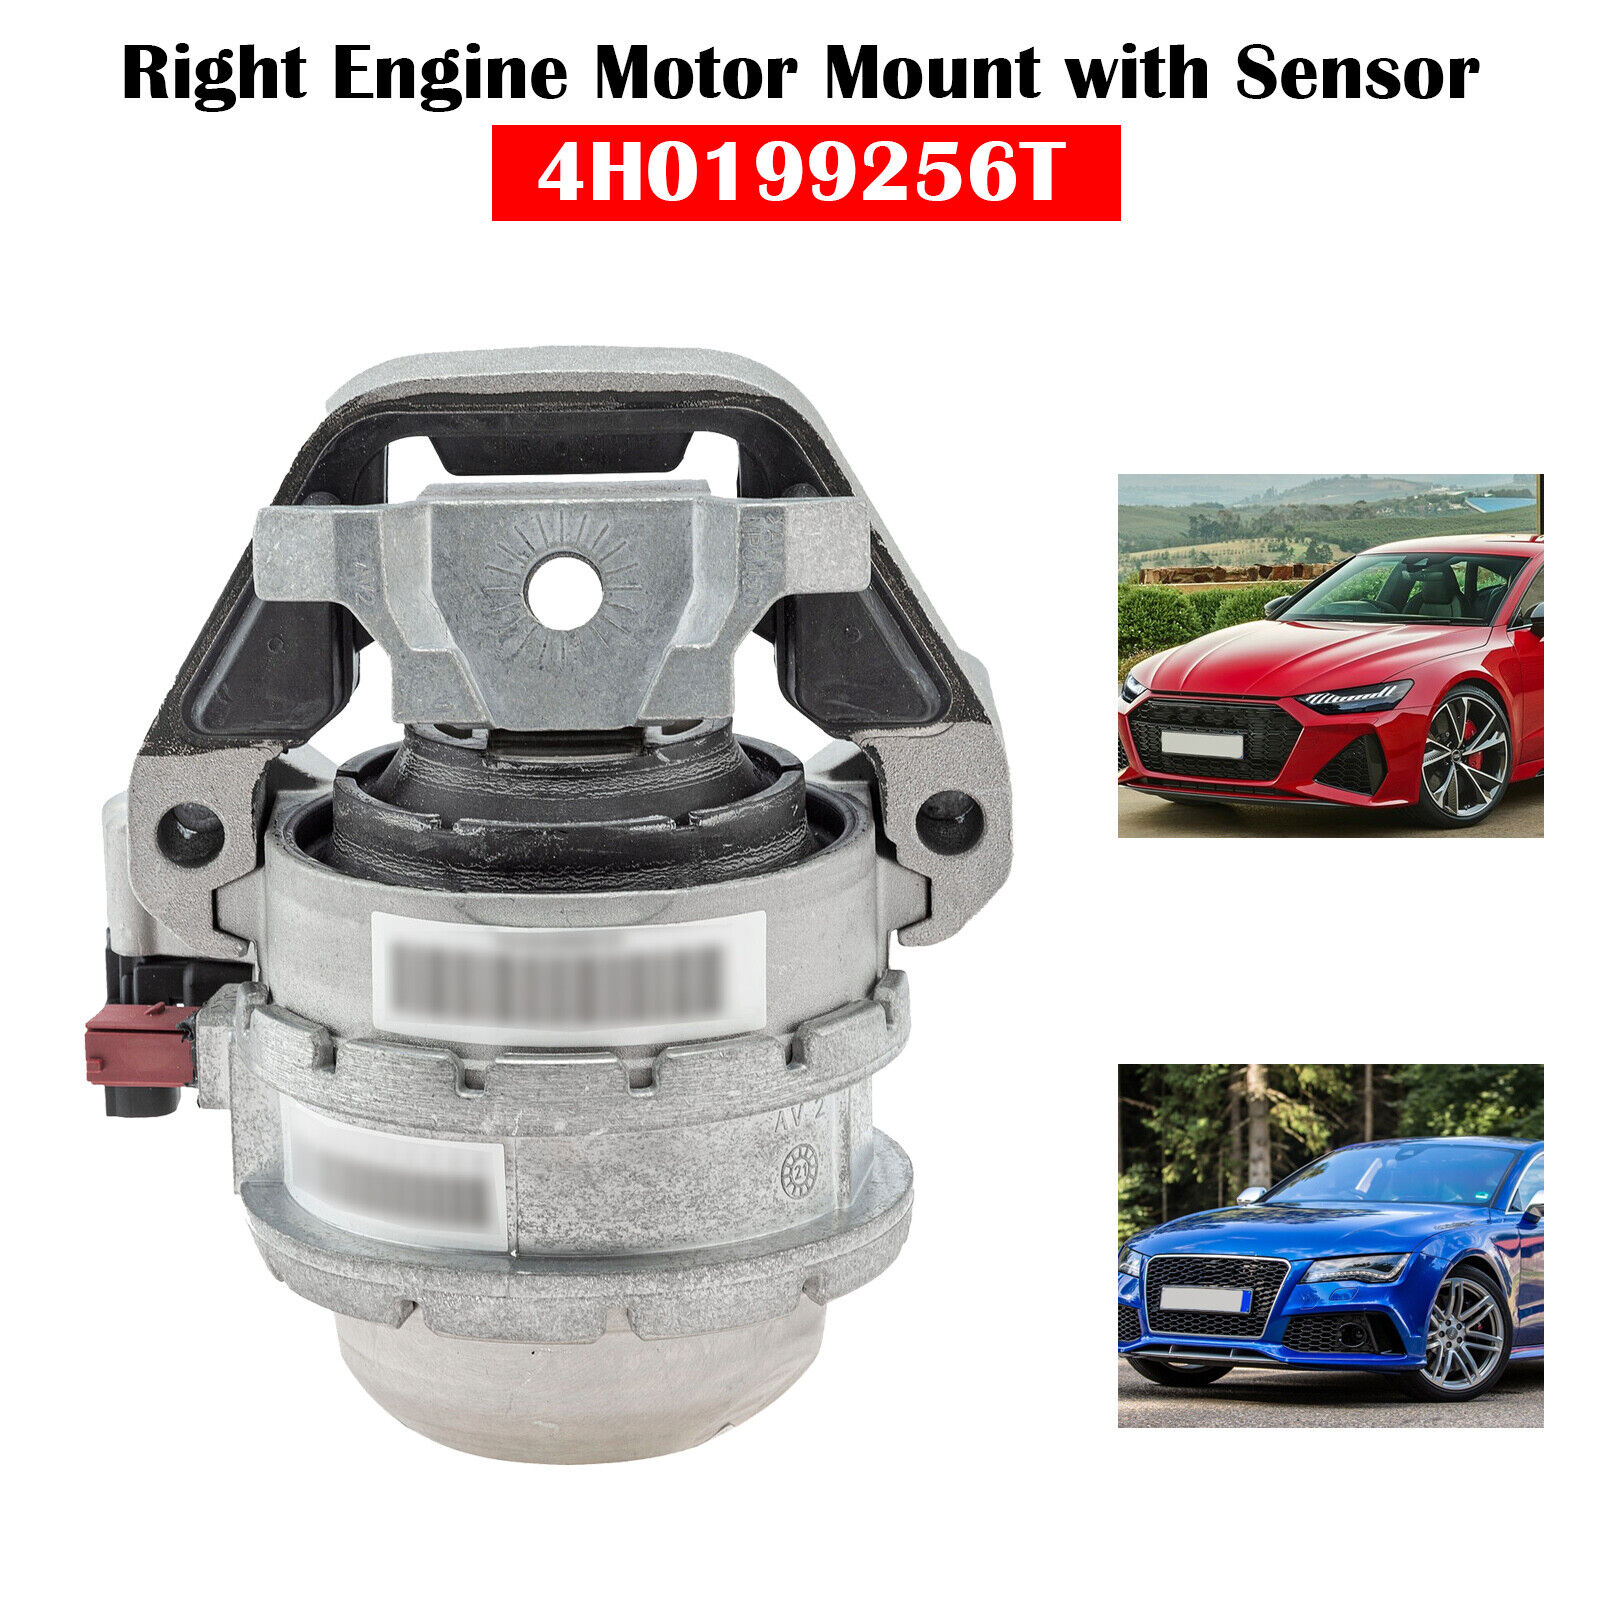 Right Engine Motor Mount With Sensor 4H0199256T Fit For Audi S6 RS6 S7 RS7 4.0L